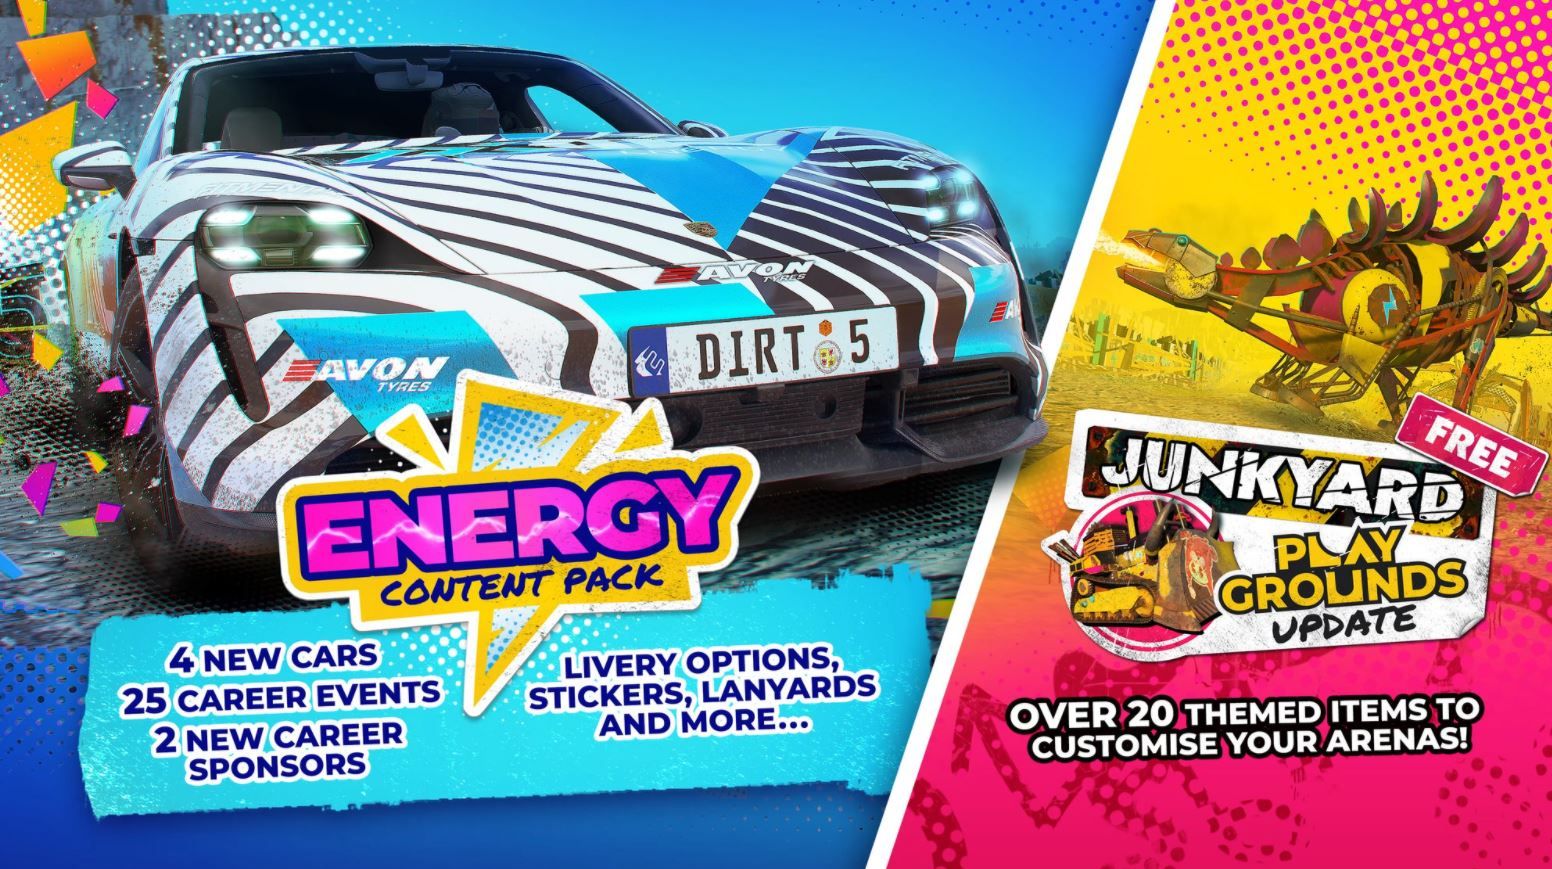 DIRT 5 Energy content pack